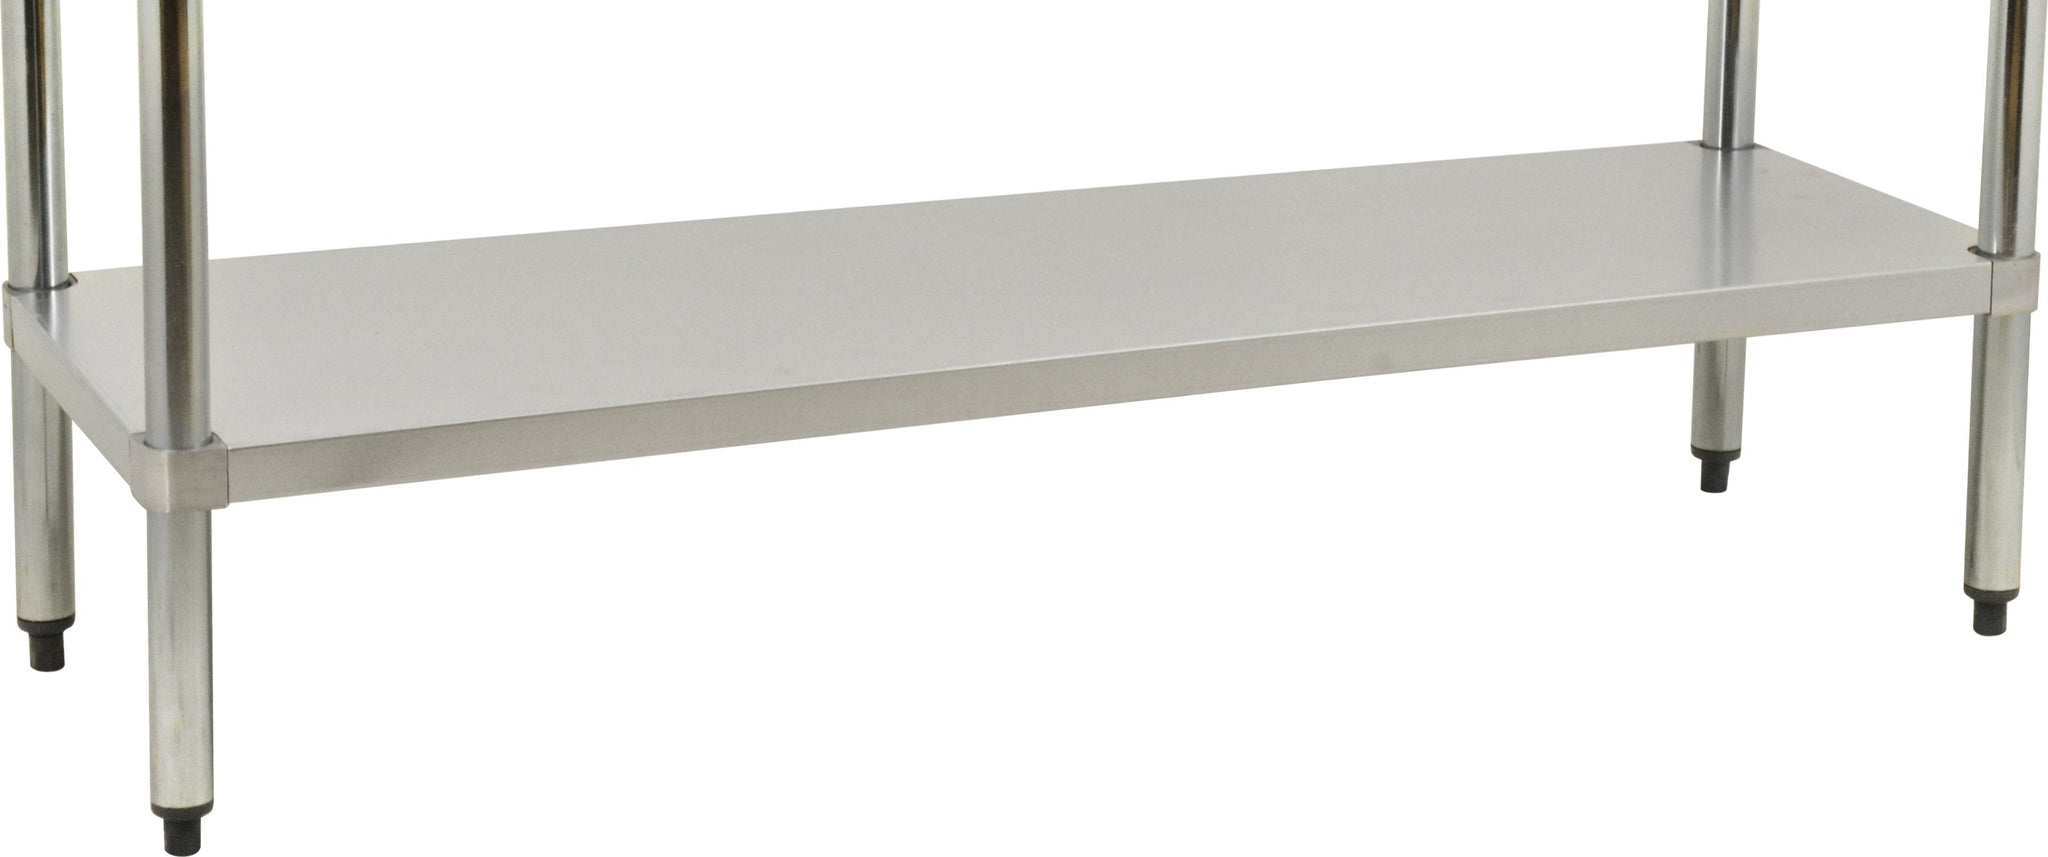 Omcan - 24” x 72” Stainless Steel Undershelf For Work Tables - 21612